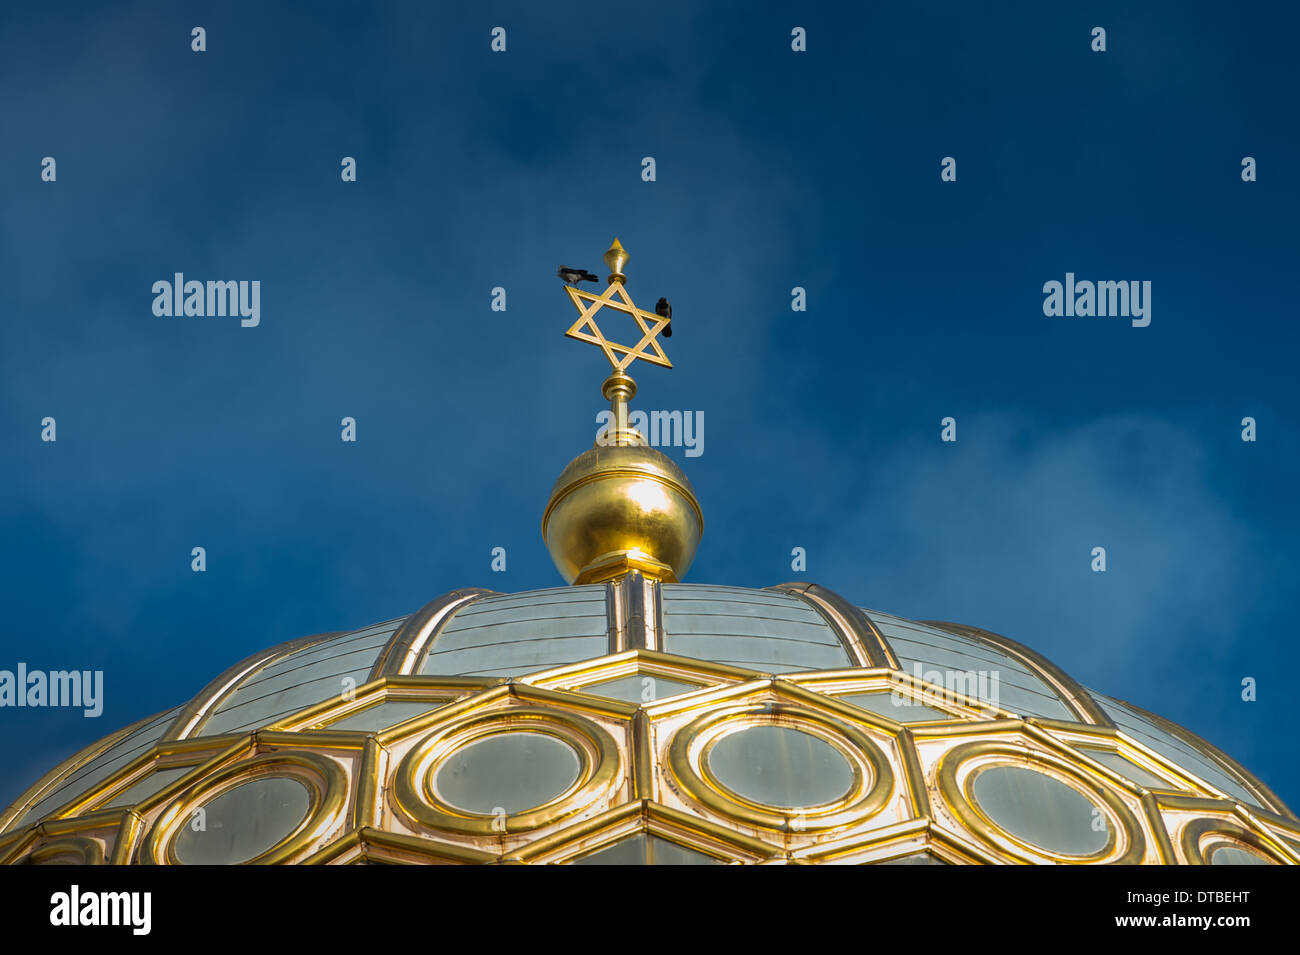 Berlin, Germany , Spire of the New Synagogue in Oranienburger Strasse with jackdaws Stock Photo